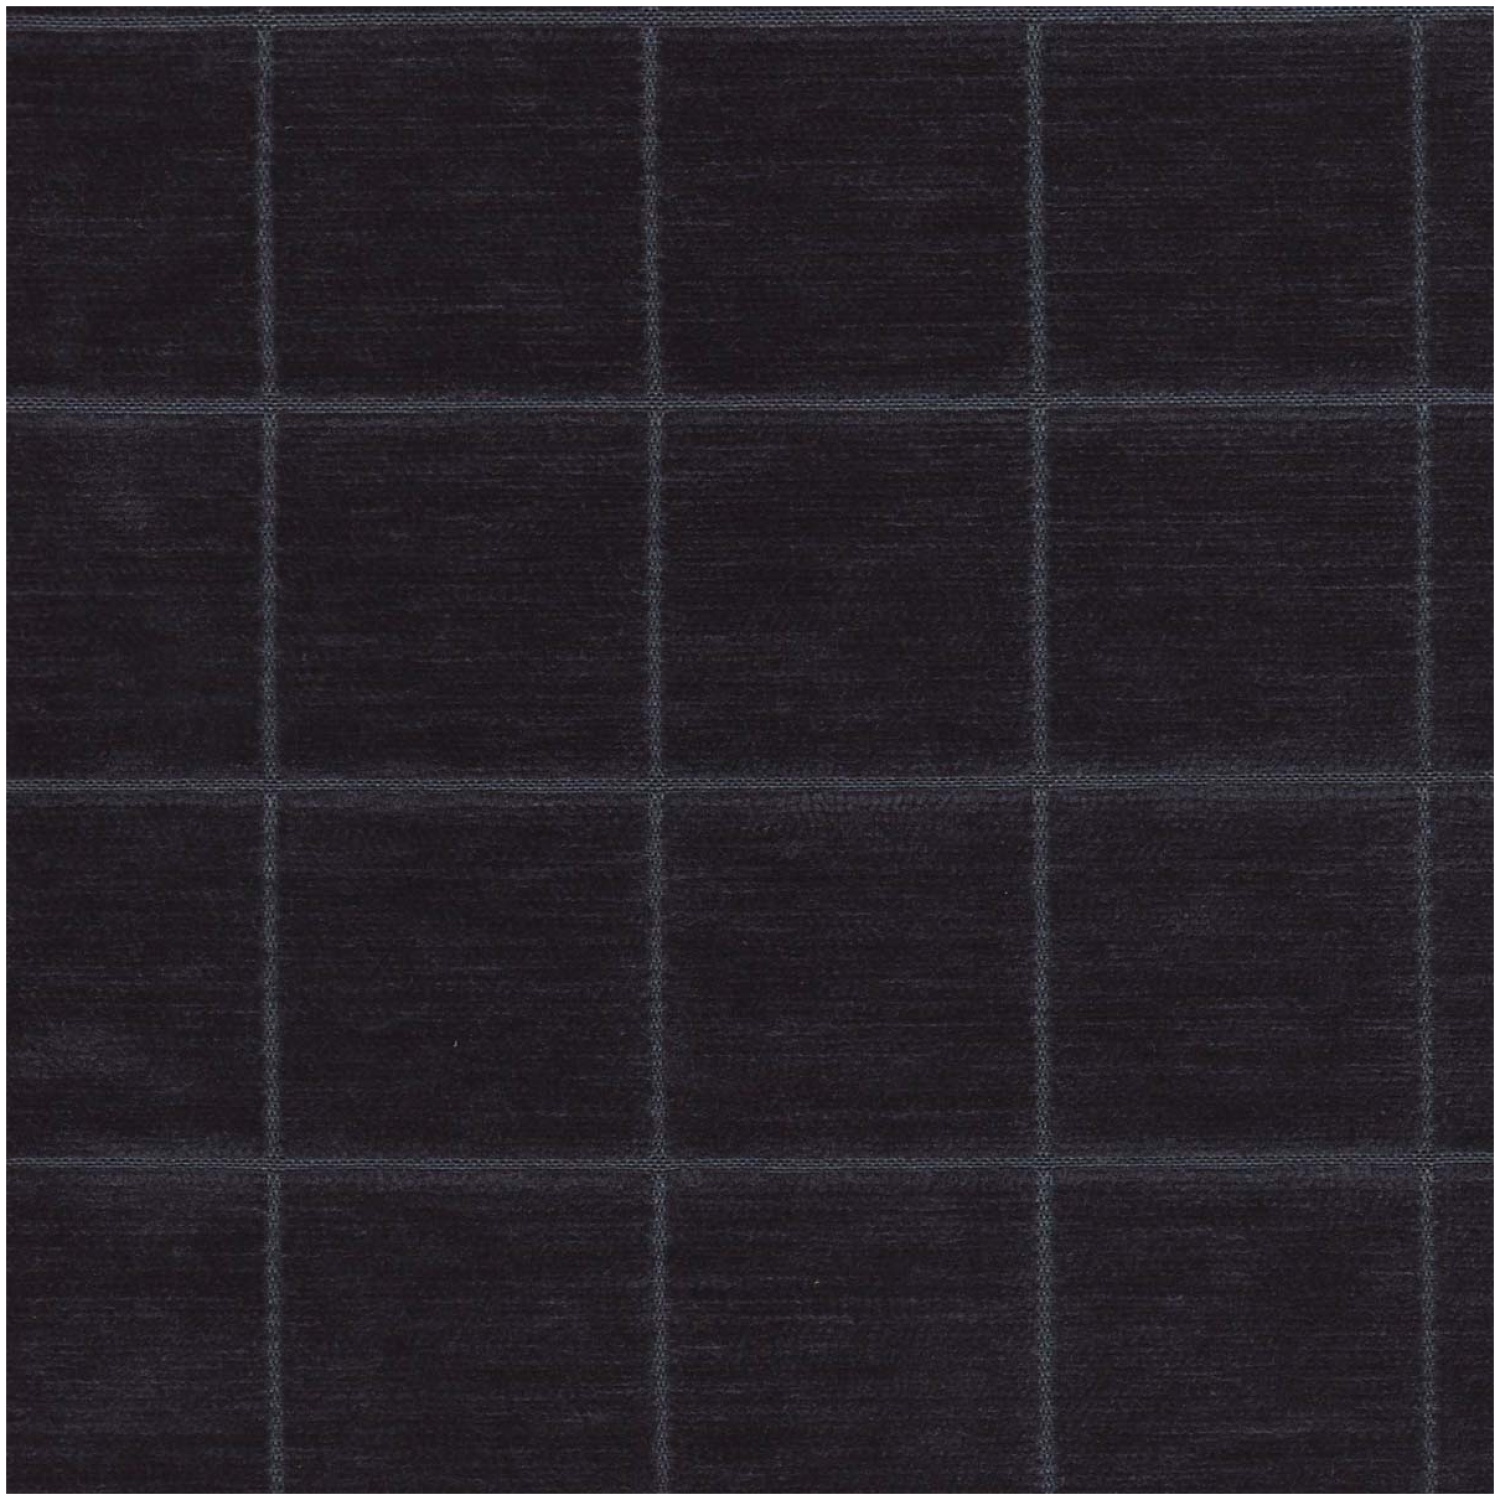 Vlock/Navy - Upholstery Only Fabric Suitable For Upholstery And Pillows Only.   - Near Me